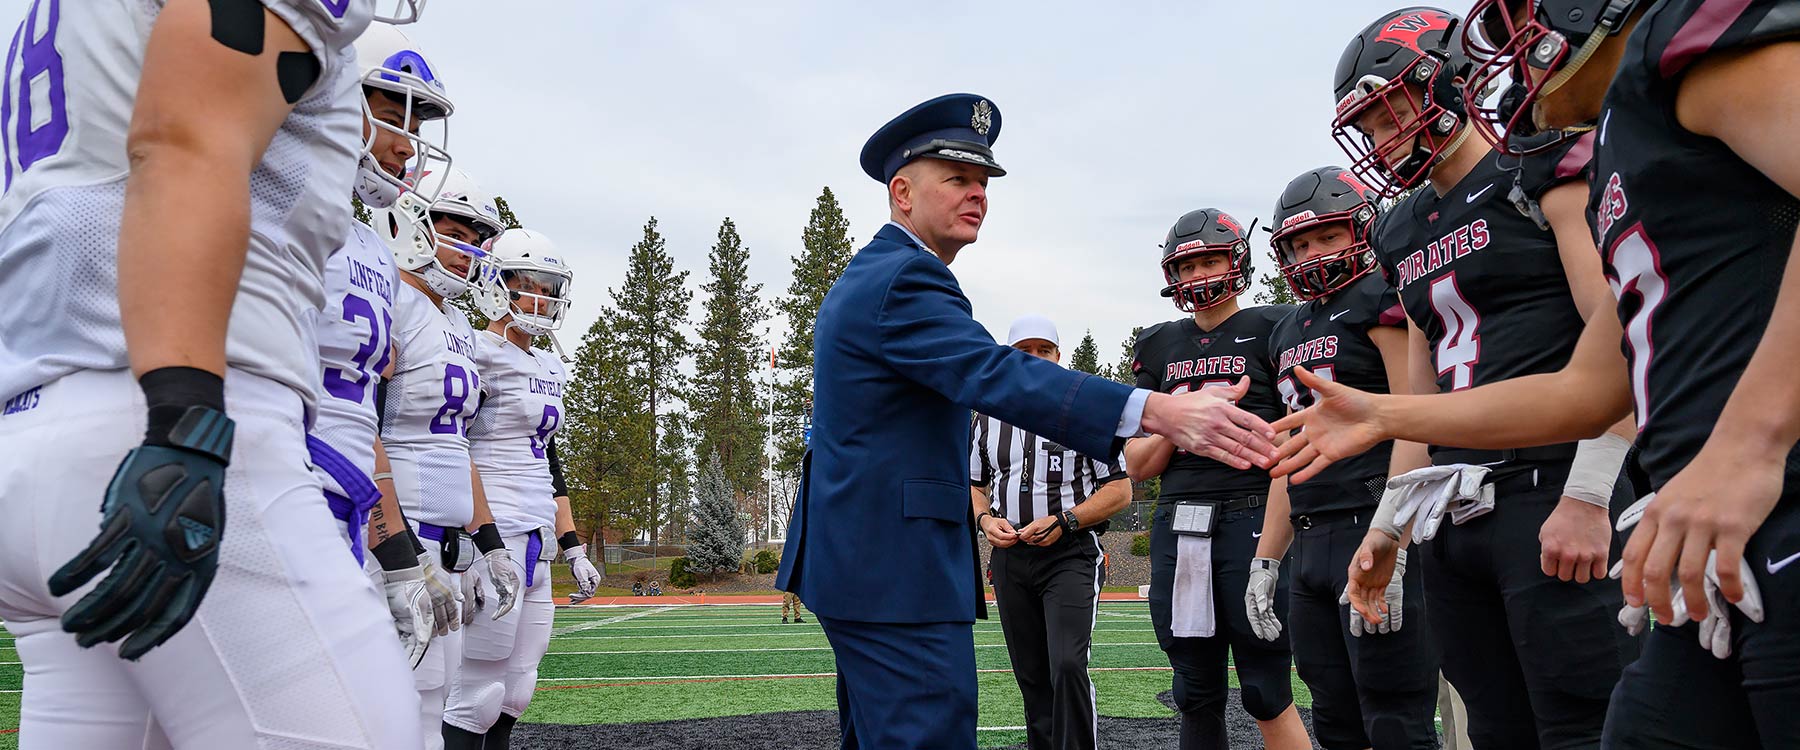 An officer in uniform shakes the hand of a Whitworth football player on the field.